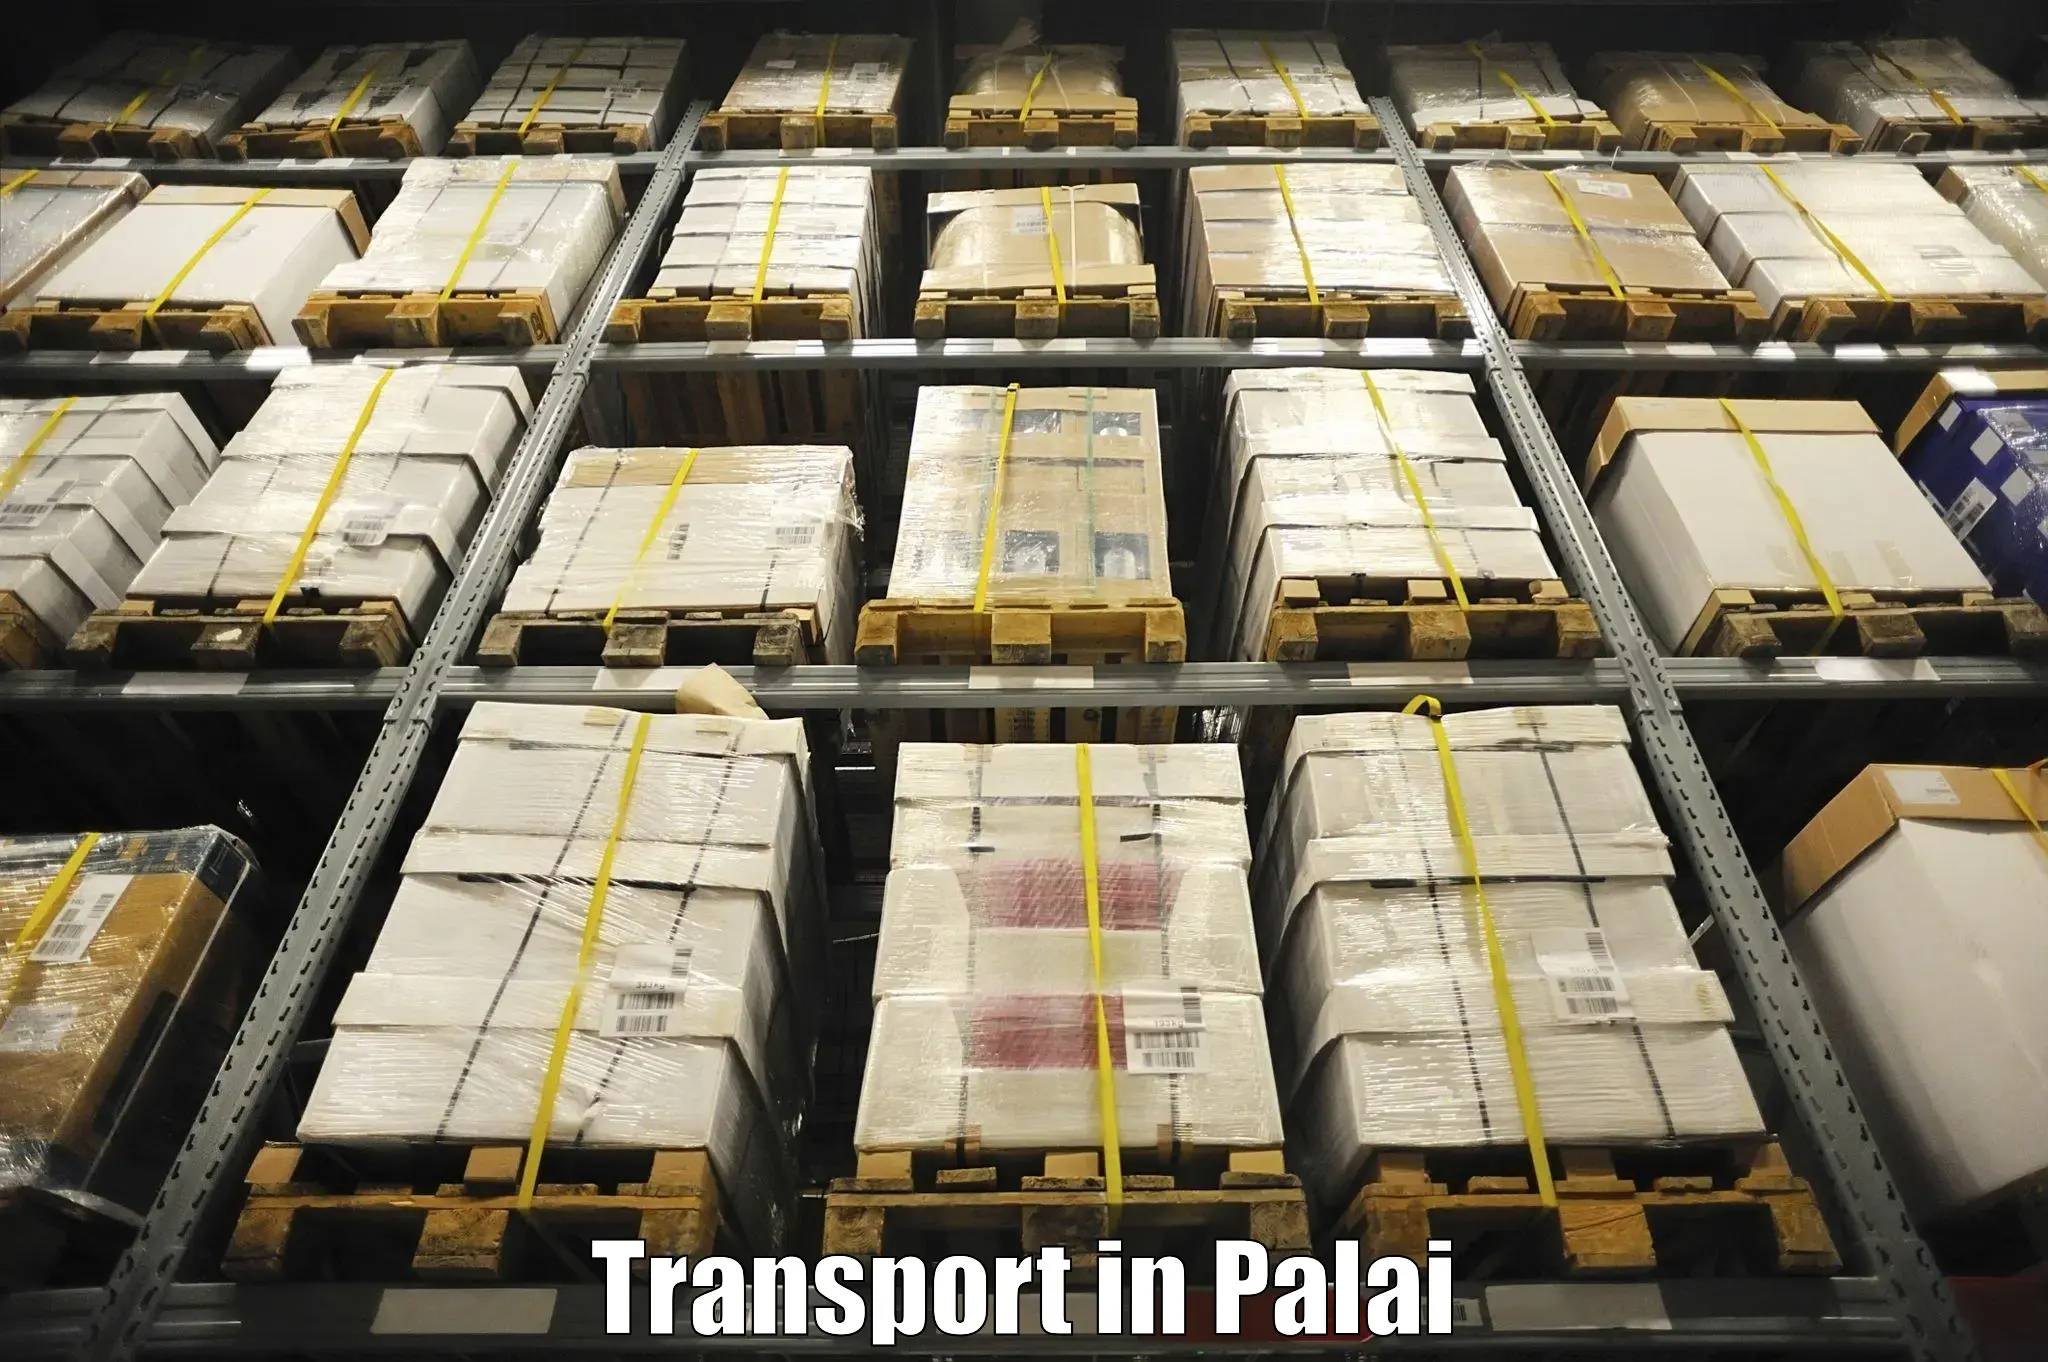 Transport bike from one state to another in Palai